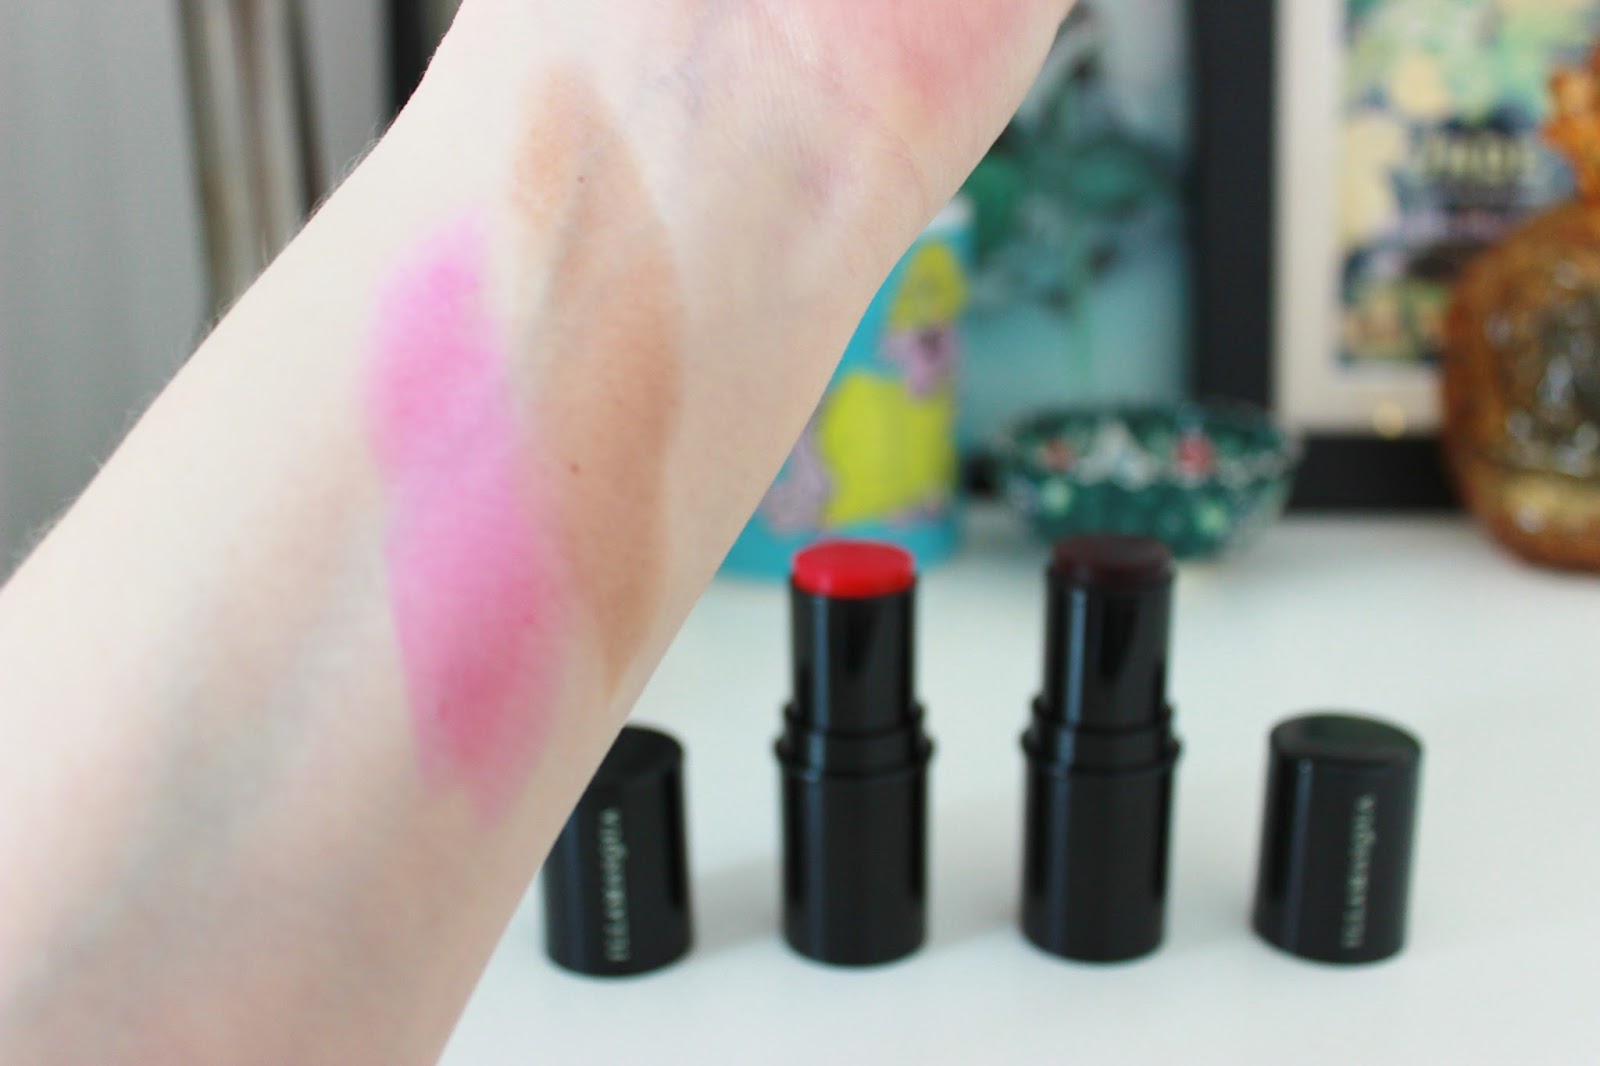 Illamasqua Gel Colour and Gel Sculpt sticks in Fluster and Silhouette swatches